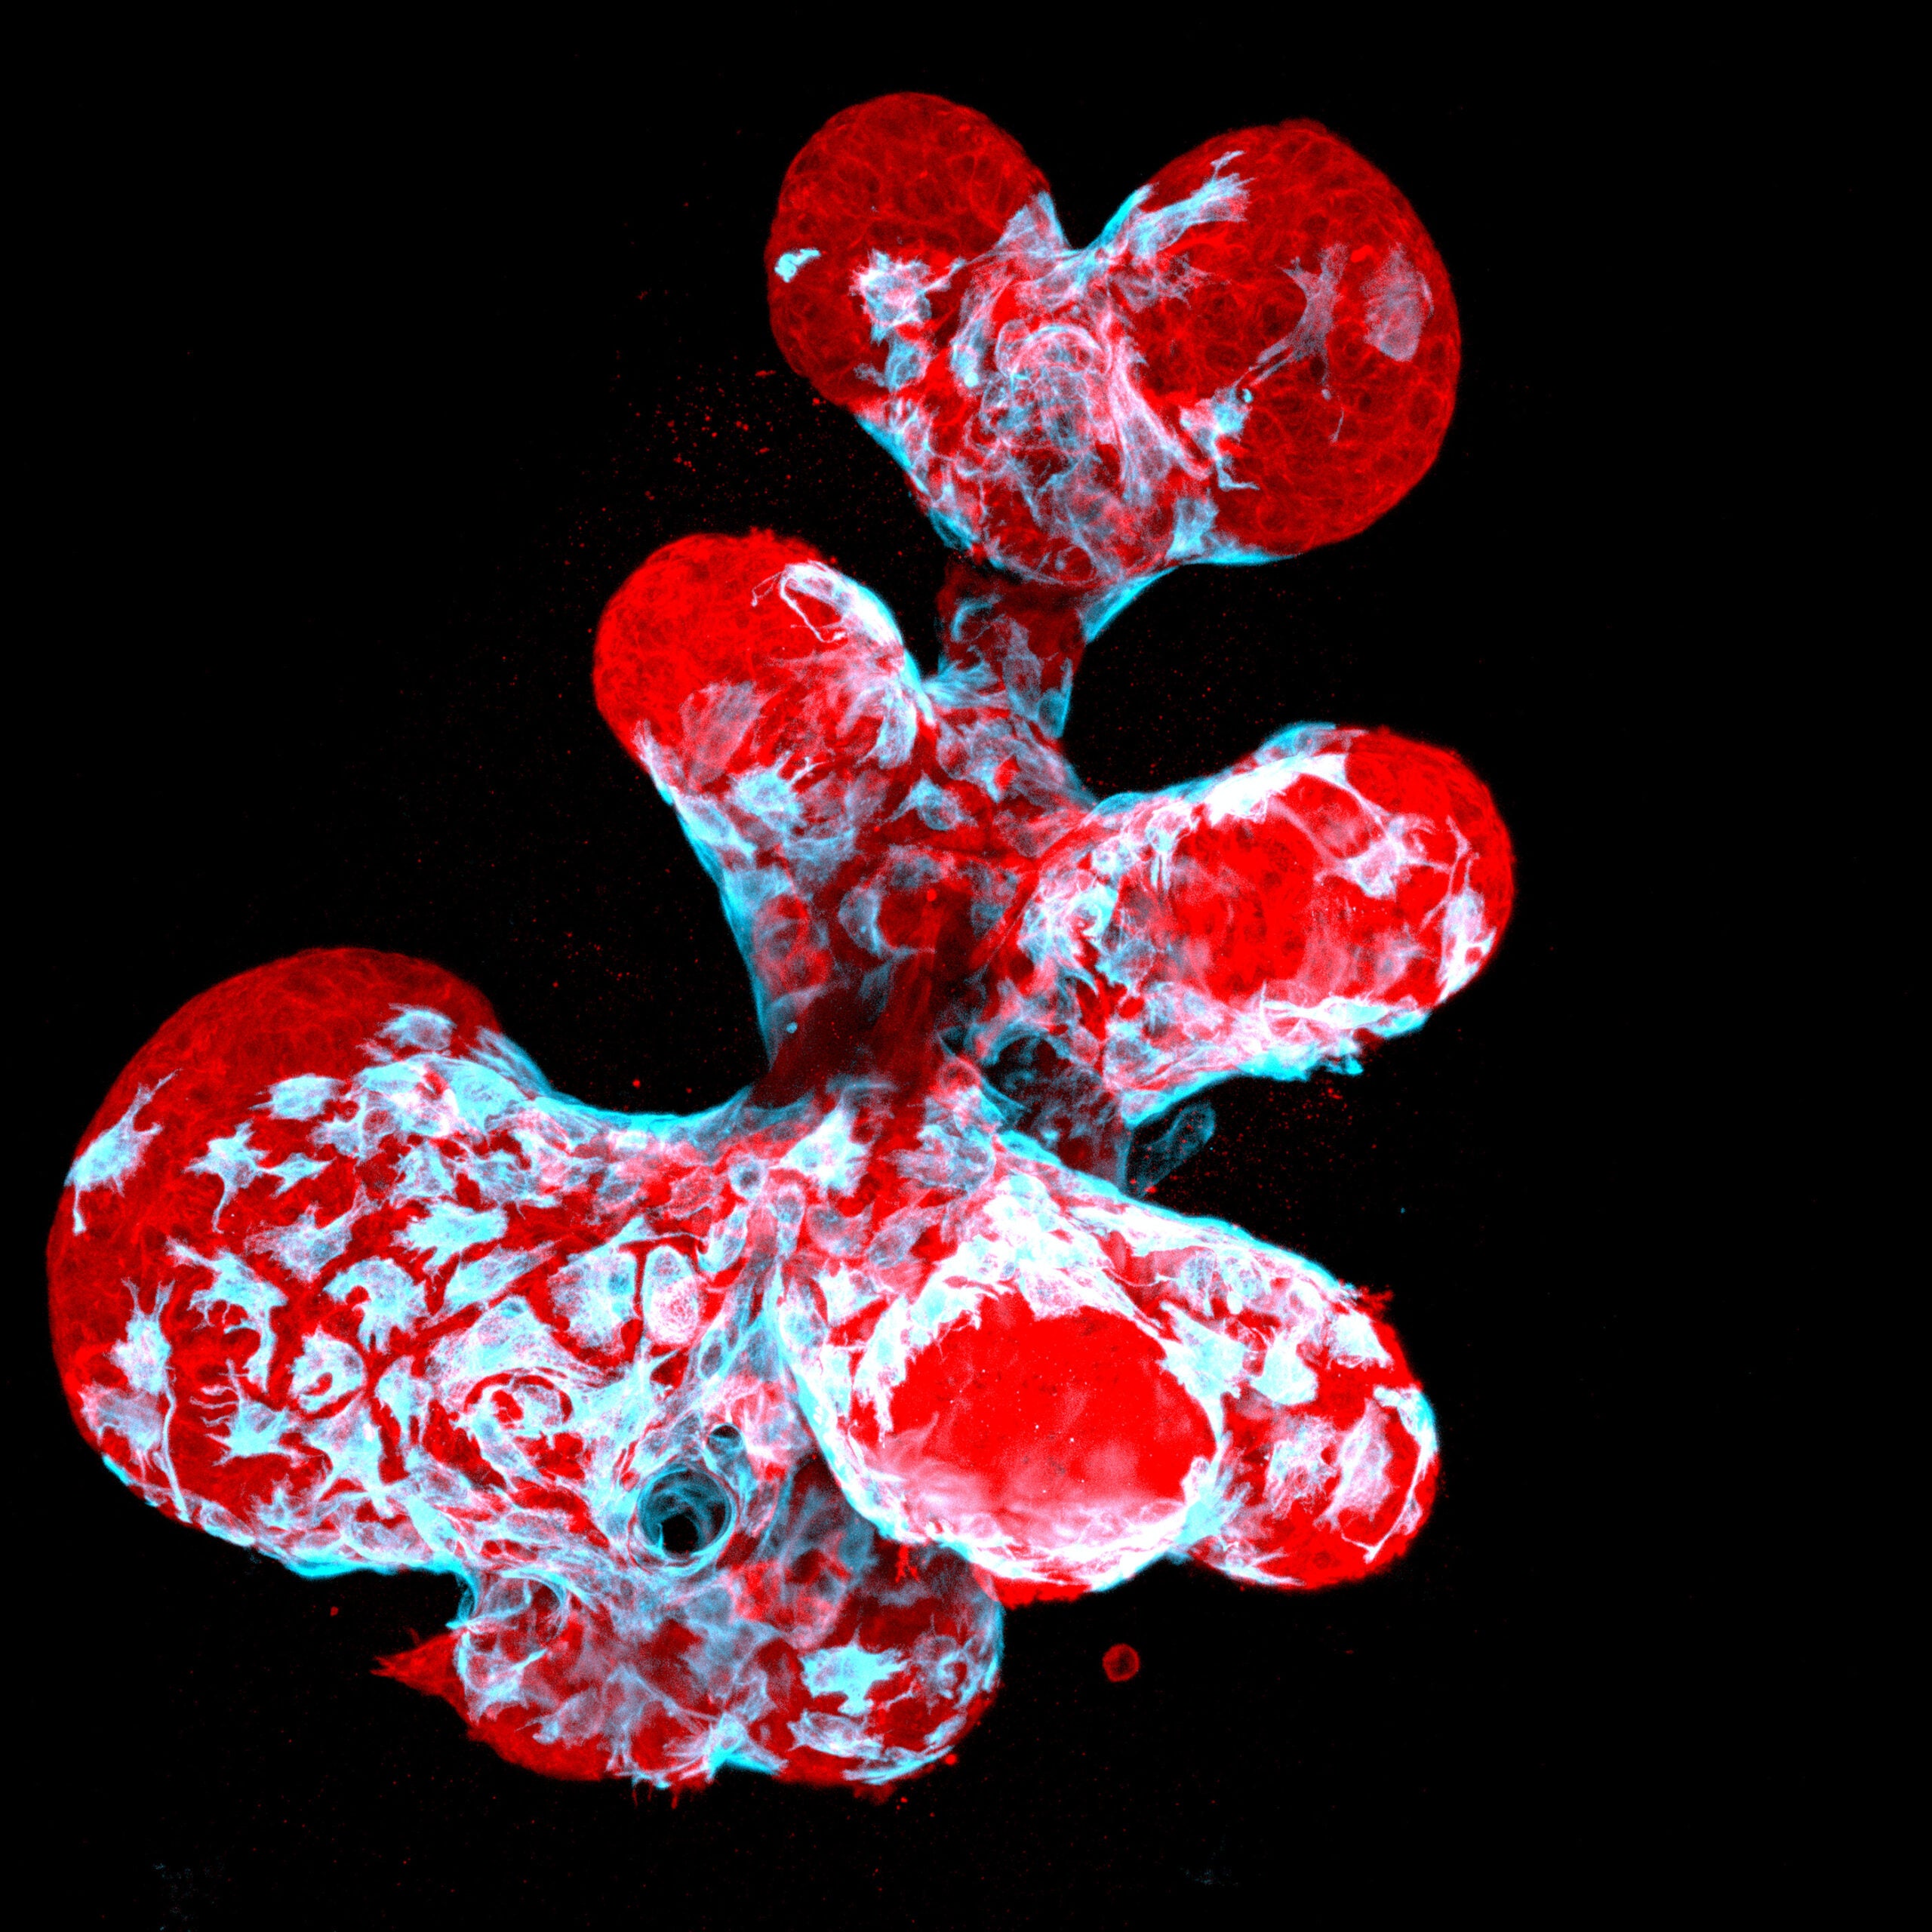 Breast organoid showing contractile myoepithelial cells (blue) crawling on secretory breast cells (red